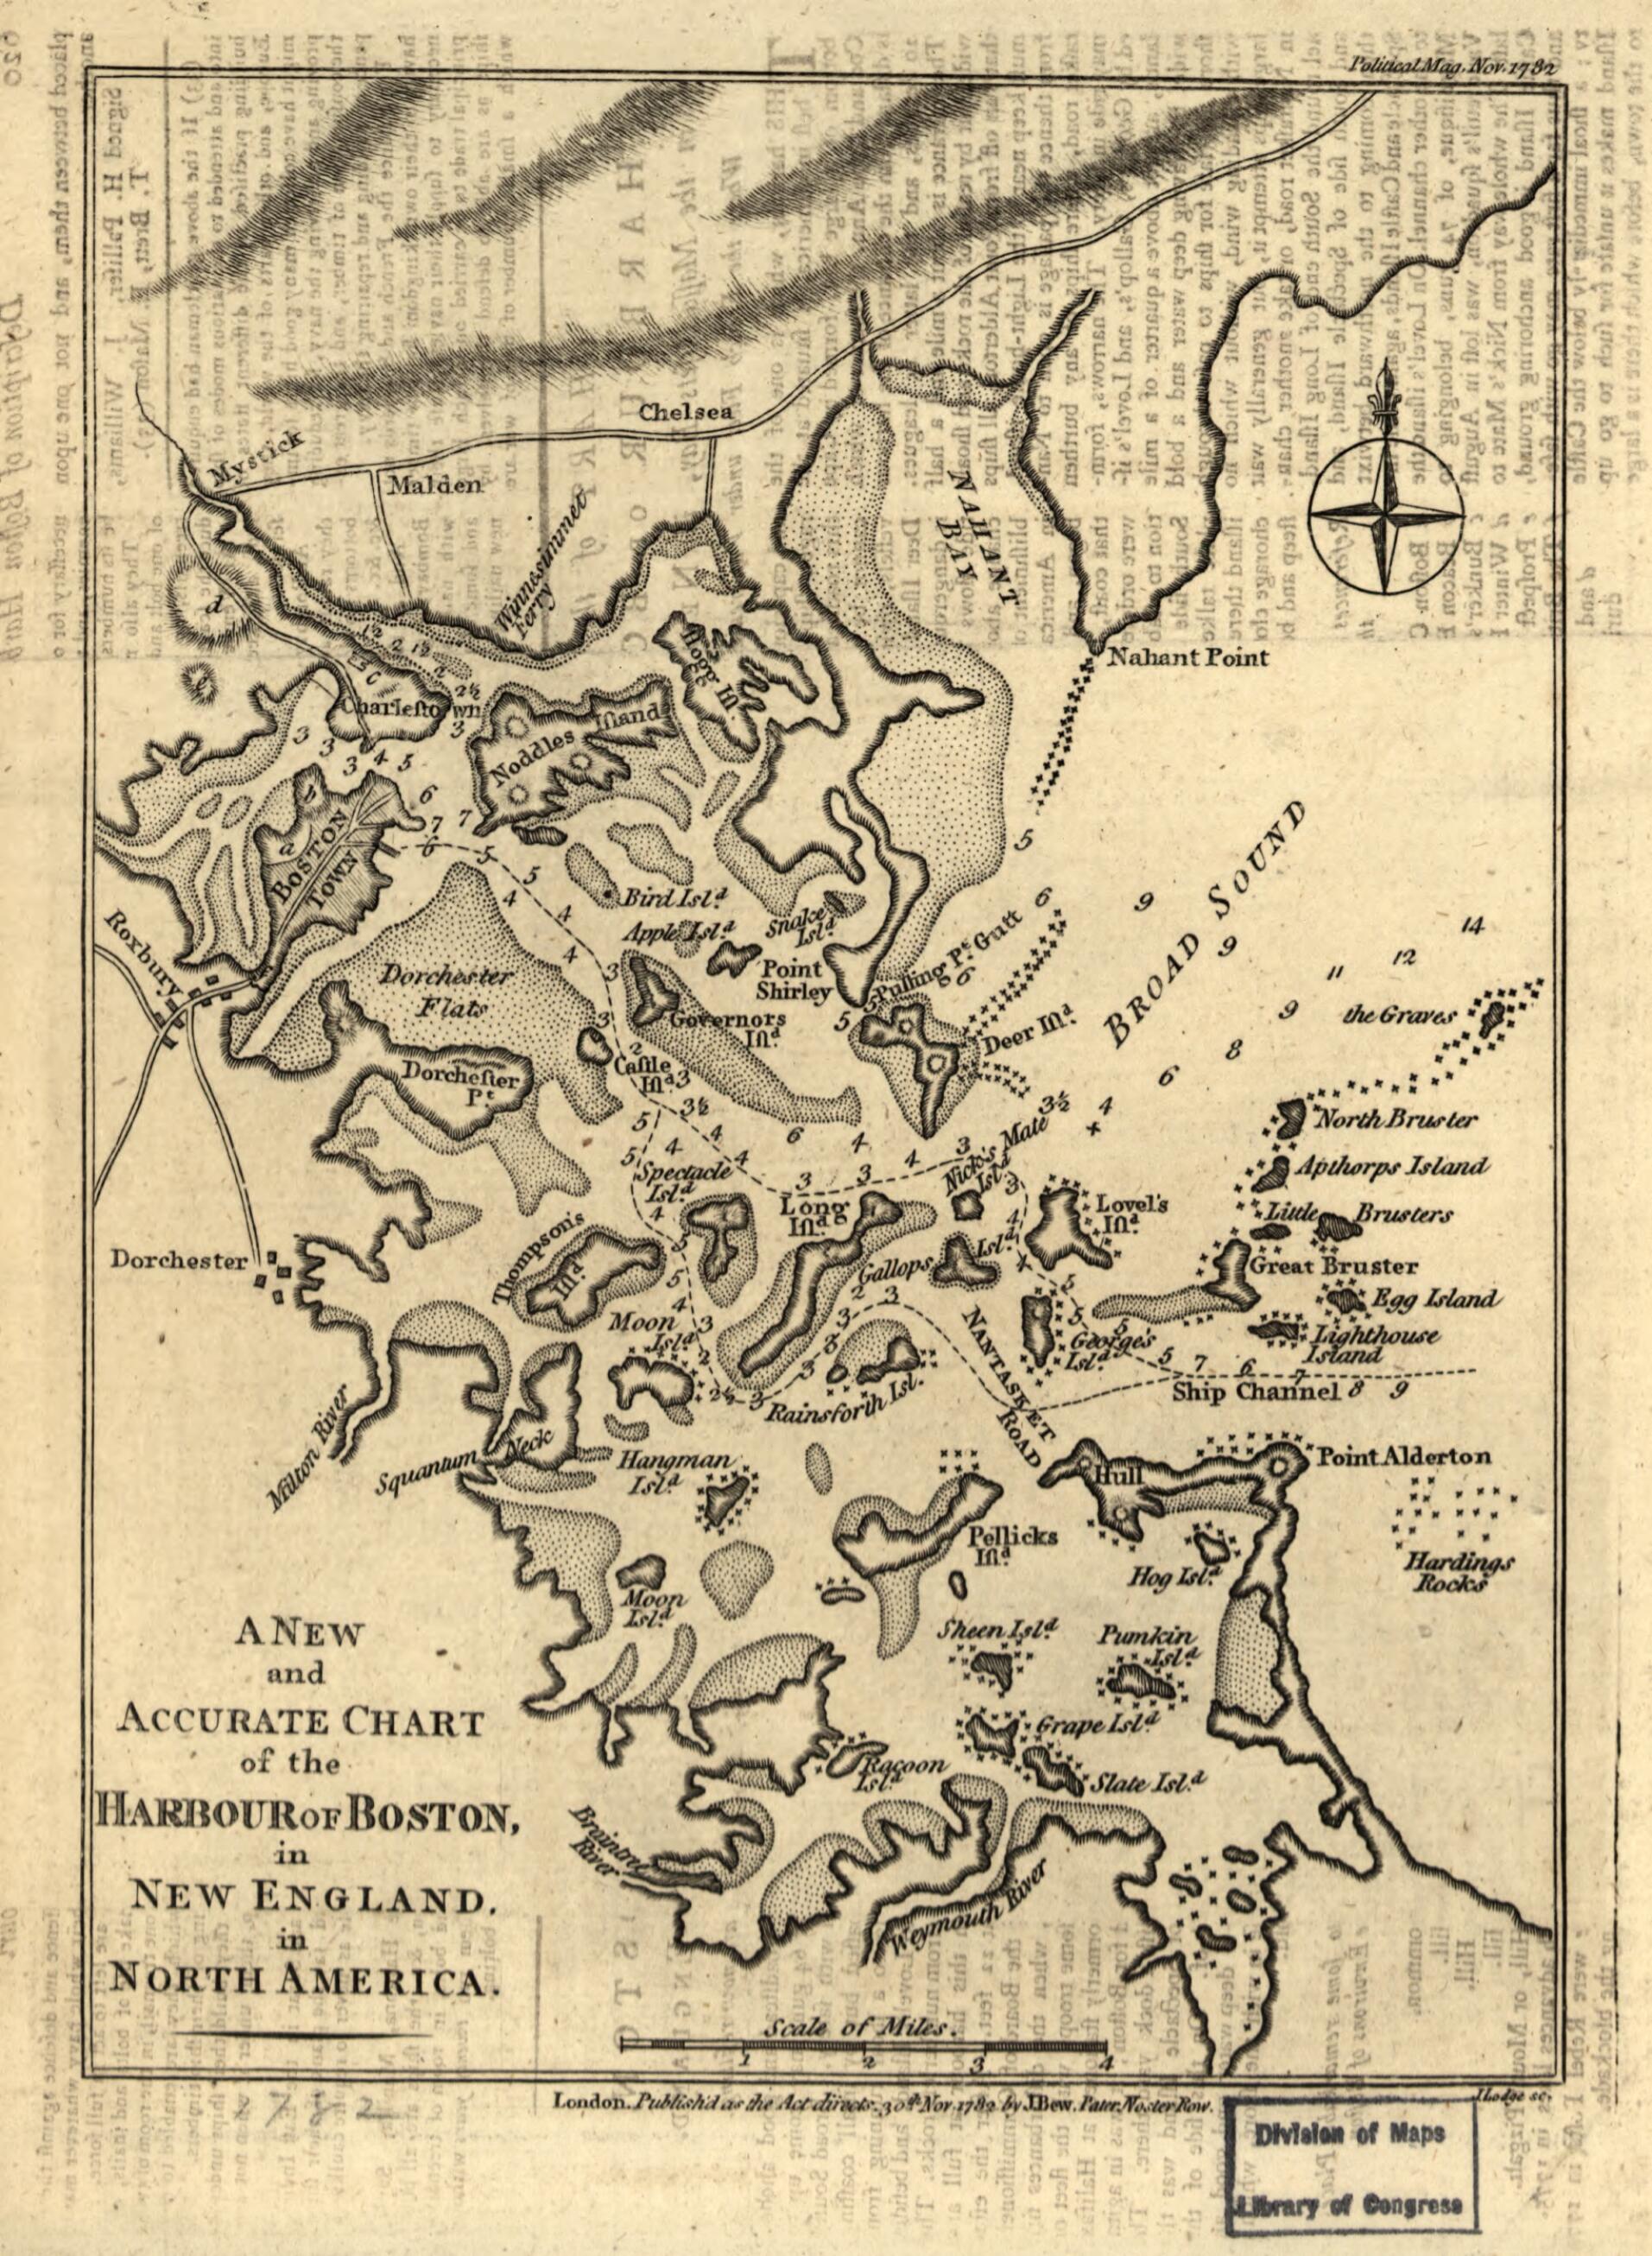 This old map of A New and Accurate Chart of the Harbour of Boston In New England In North America from 1782 was created by John Bew, John Lodge in 1782